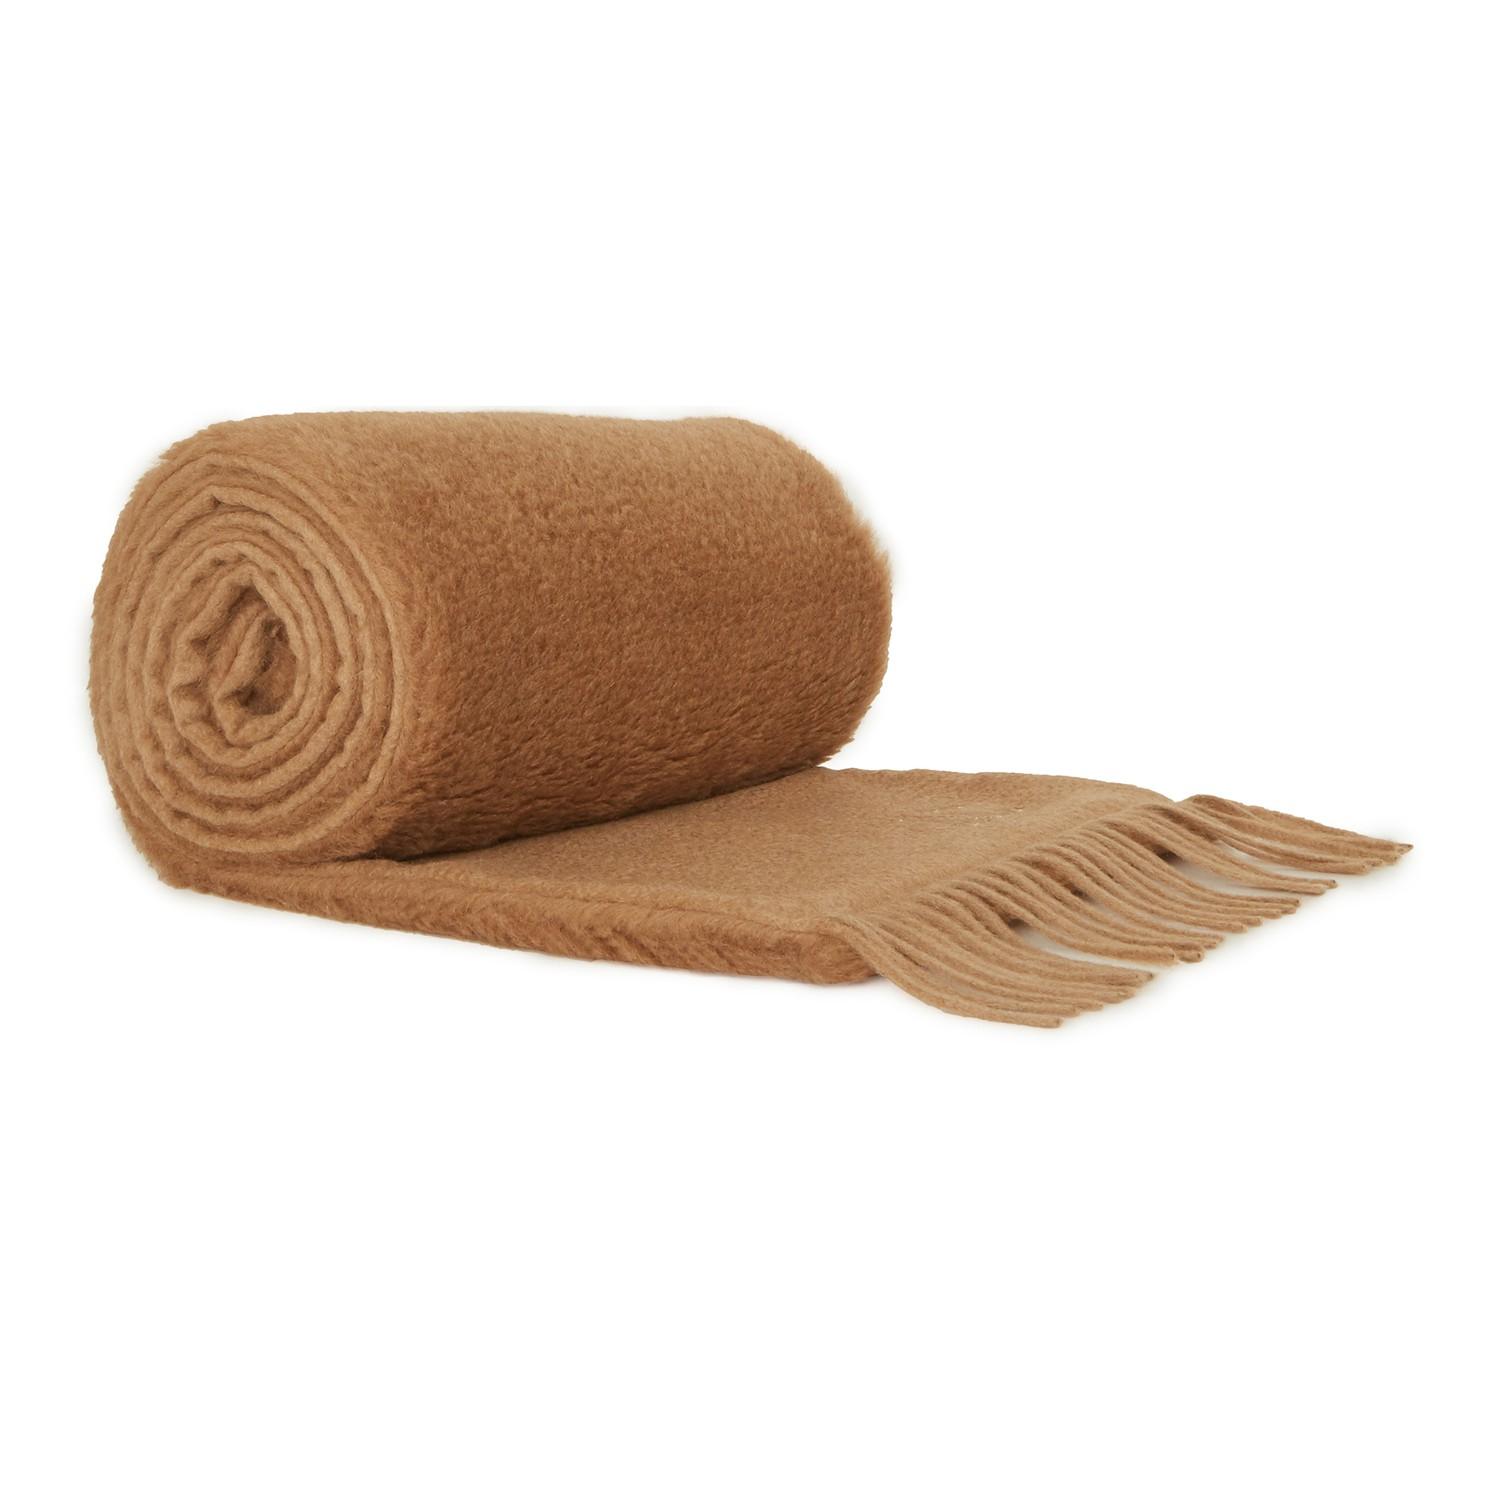 Max Mara Camel Wool Scarf in Natural - Lyst